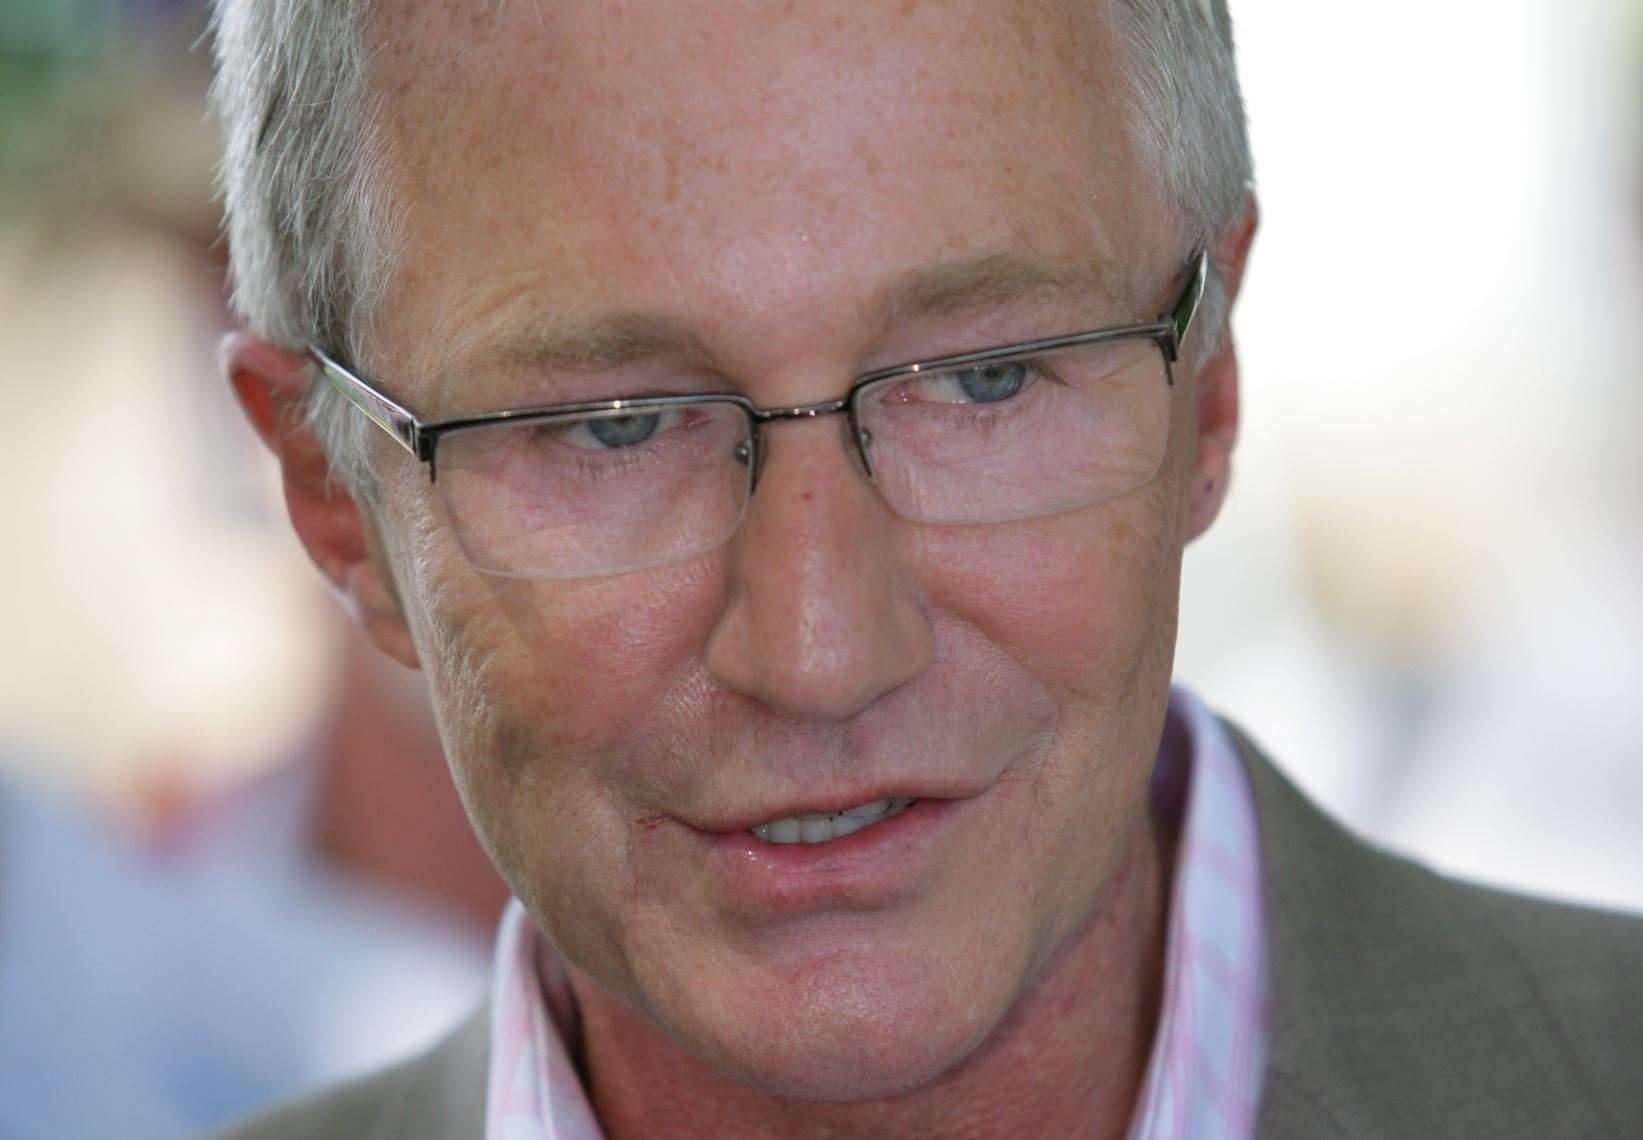 Paul O'Grady has lived in Aldington for years and has opened the village fete on several occasions, including here in 2008